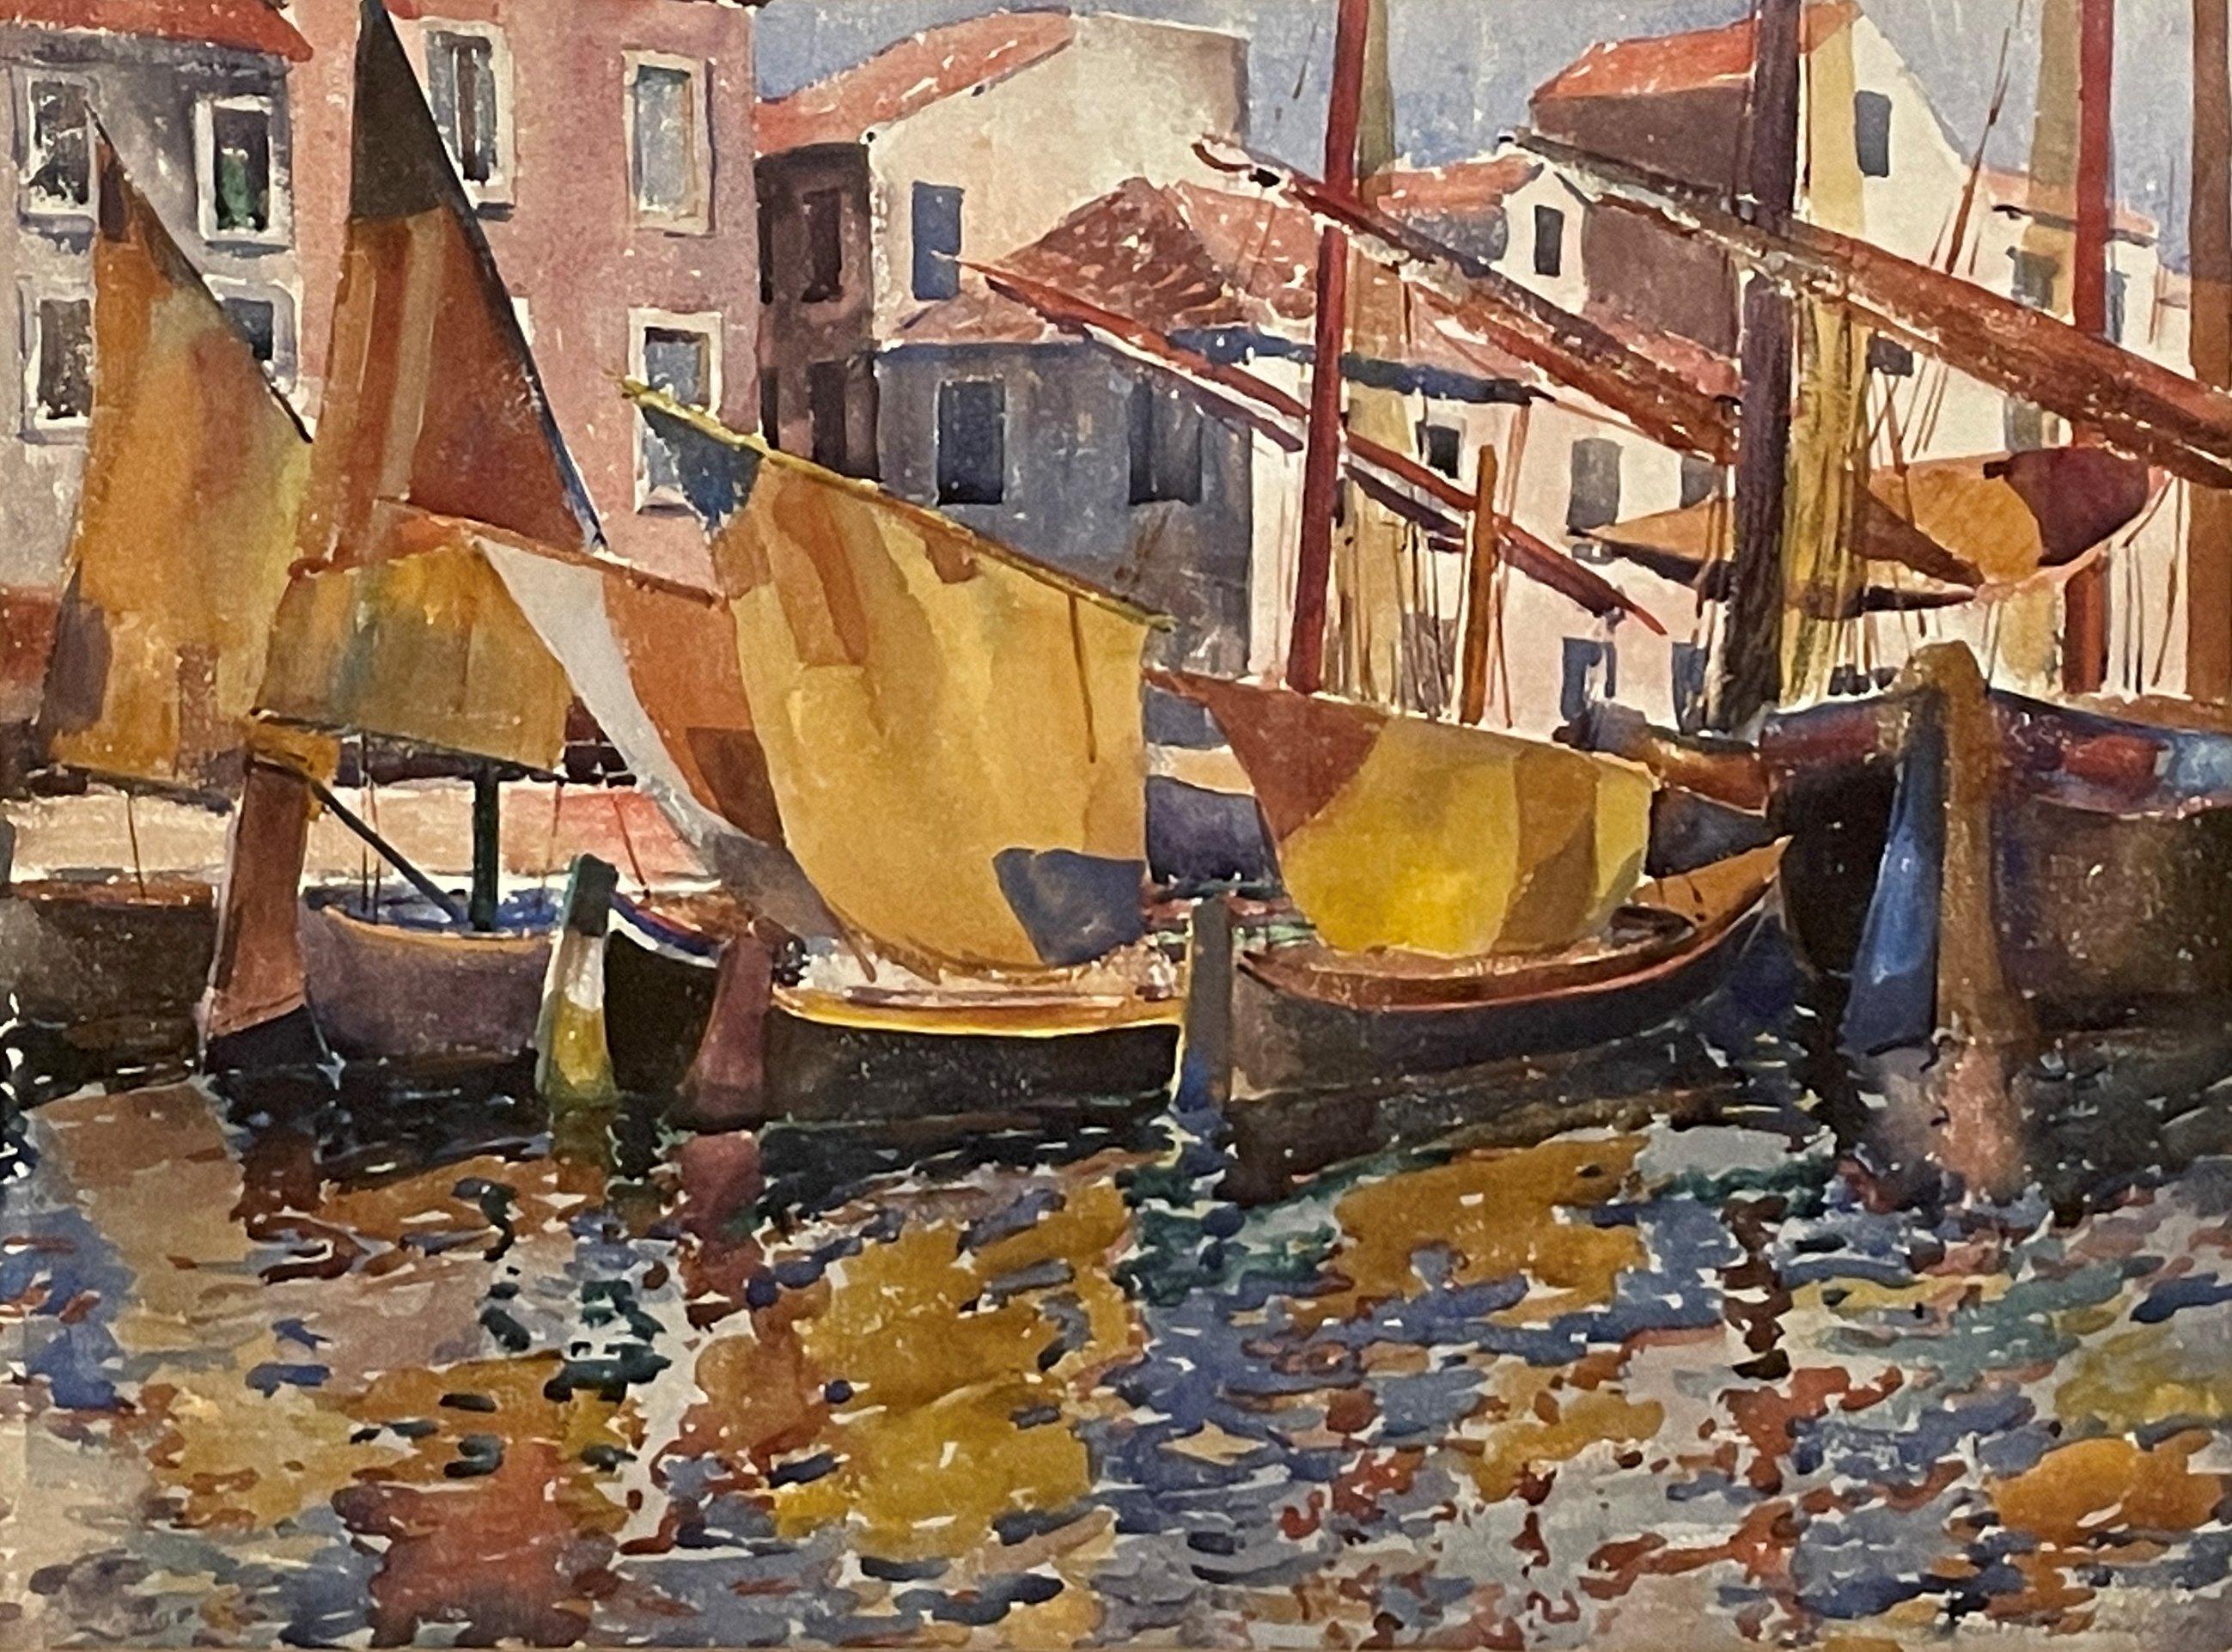 Louis Wolchonok (1898 - 1973)
Gondolas at the Dock, Venice, Italy, 1928
Watercolor on paper
Sight 18 x 23 1/2 inches
Signed and dated lower right

Louis Wolchonok was an author of art books, etcher, painter of townscapes, landscapes, figures,